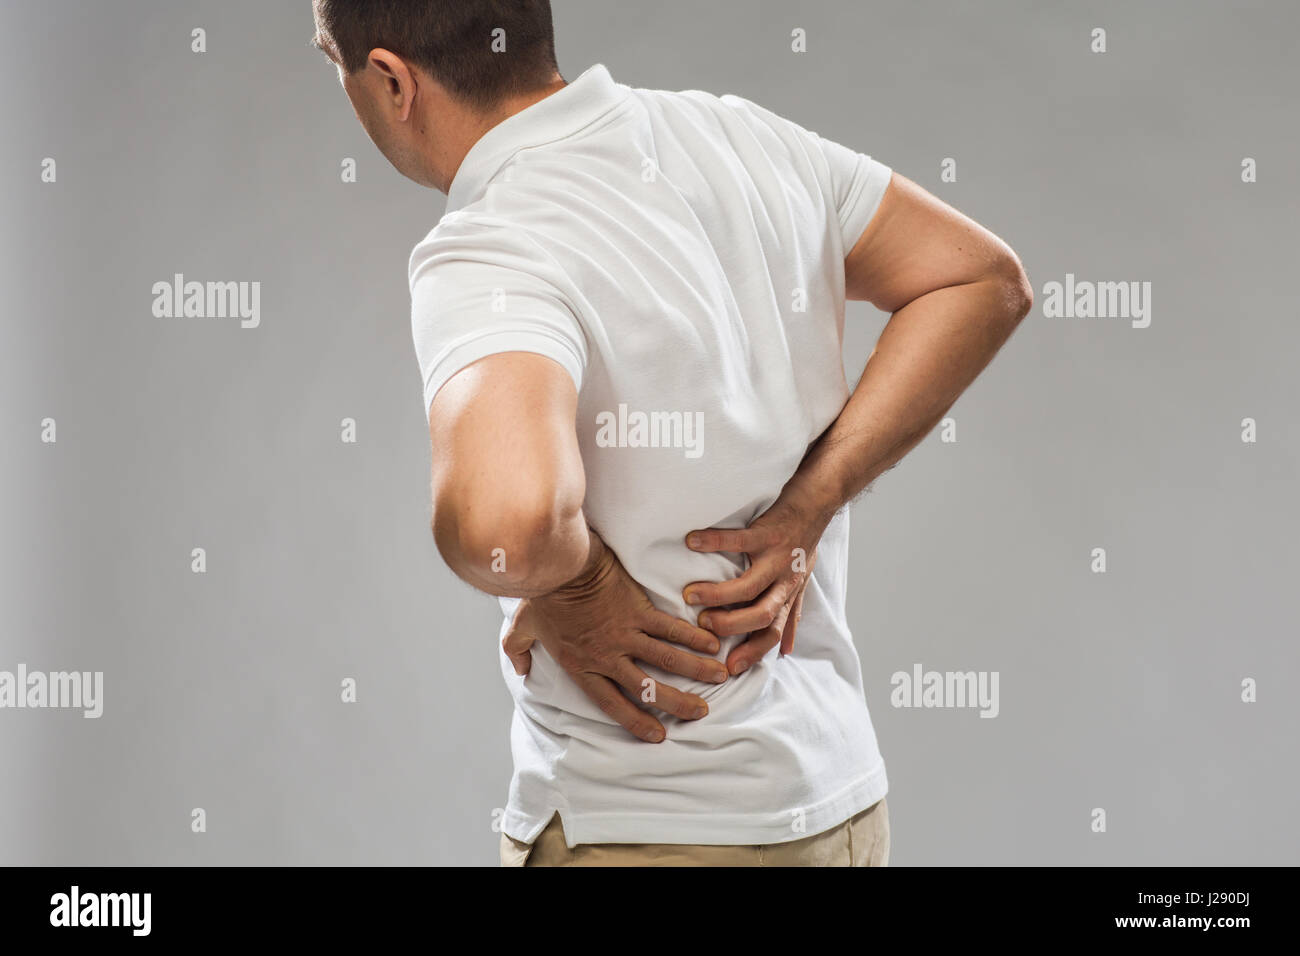 close up of man suffering from backache Stock Photo